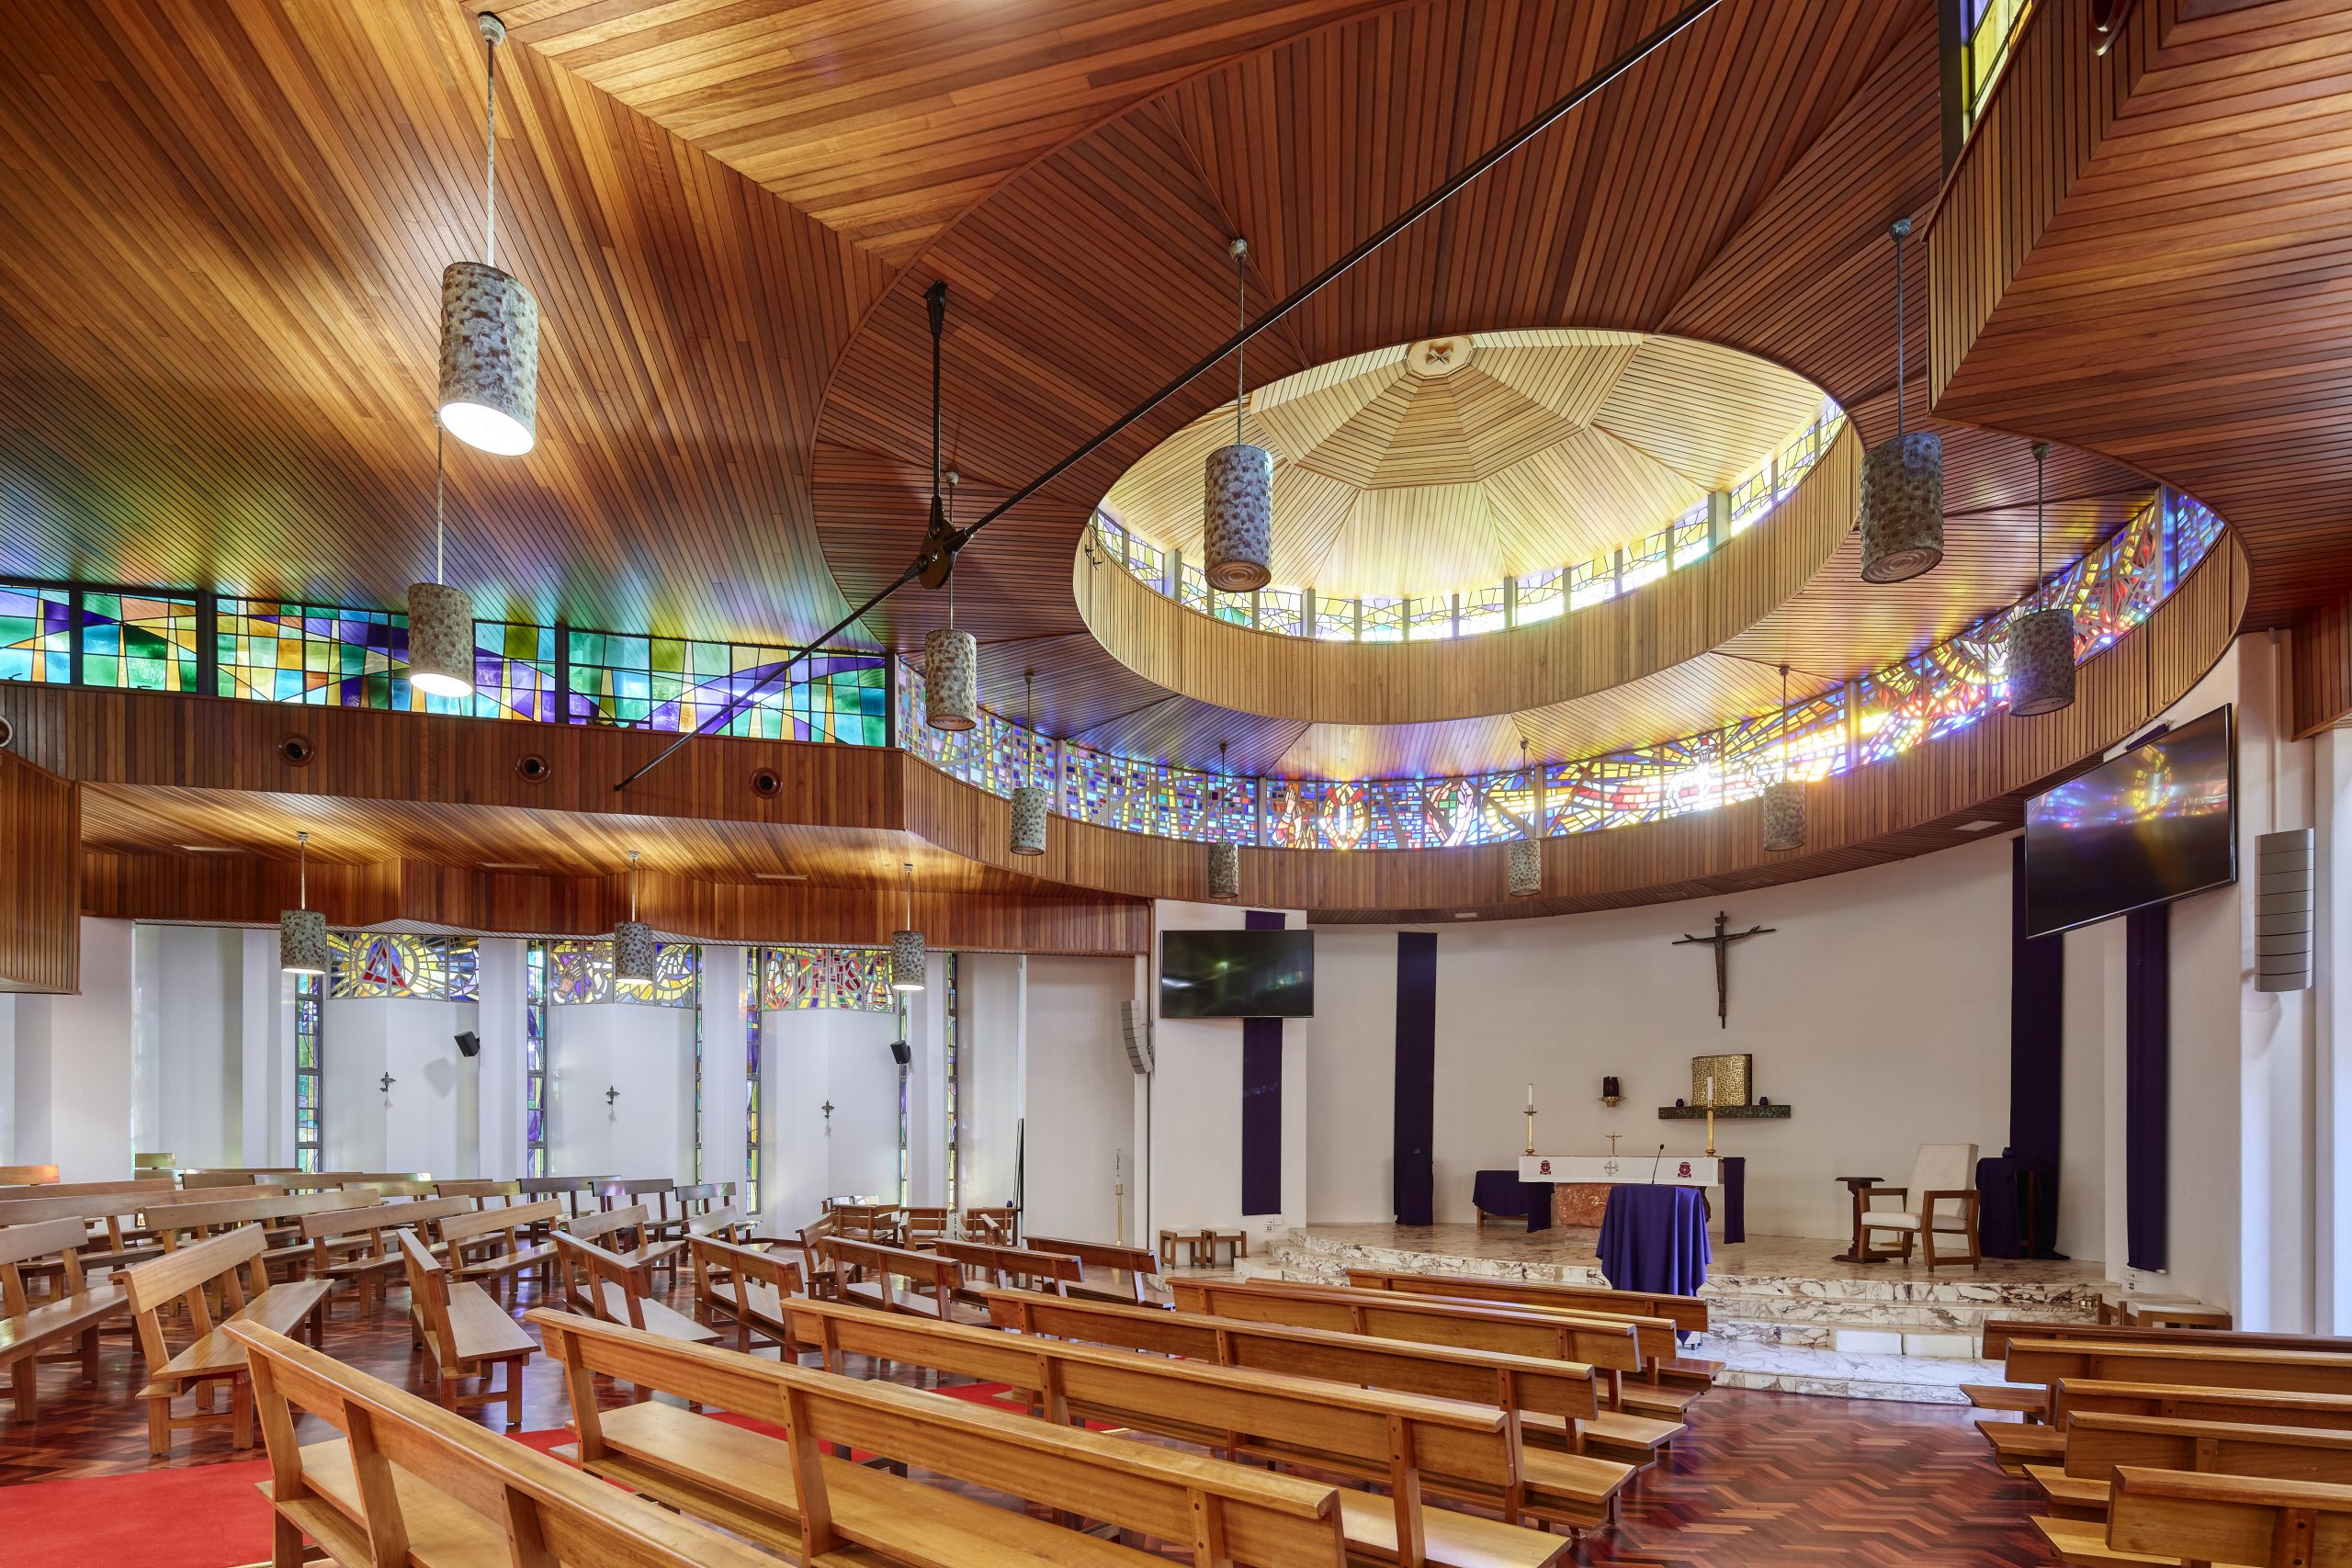 Trendplank Used for Timber Ceilings and Cladding For Aquinas College Chapel Project